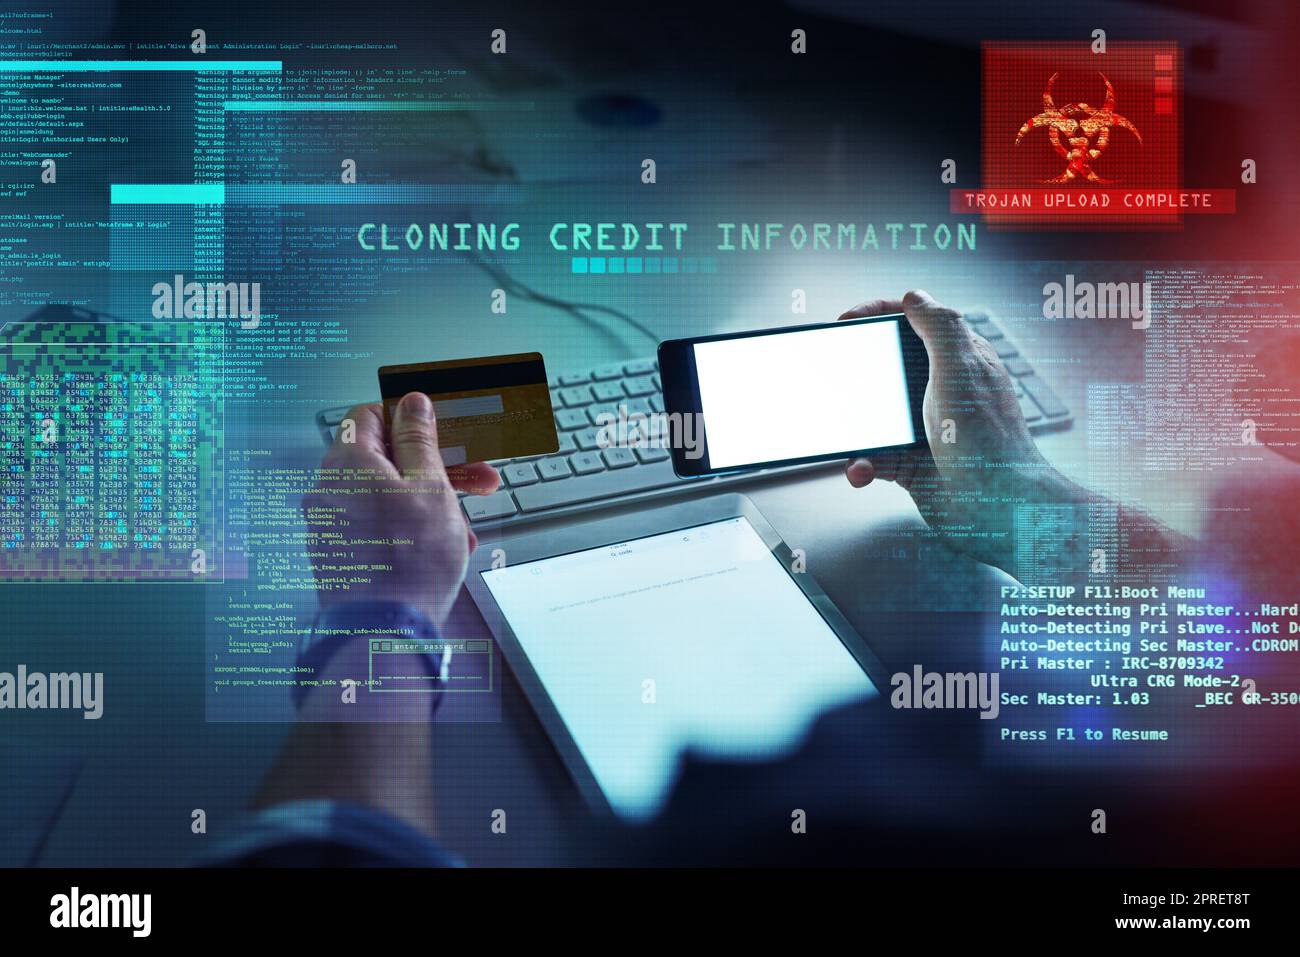 Cyber security, hacking and fraud with a computer hacker holding a credit card and phone while cloning a bank account. Theft, crime and data protection with CGI, special effects or overlay background Stock Photo